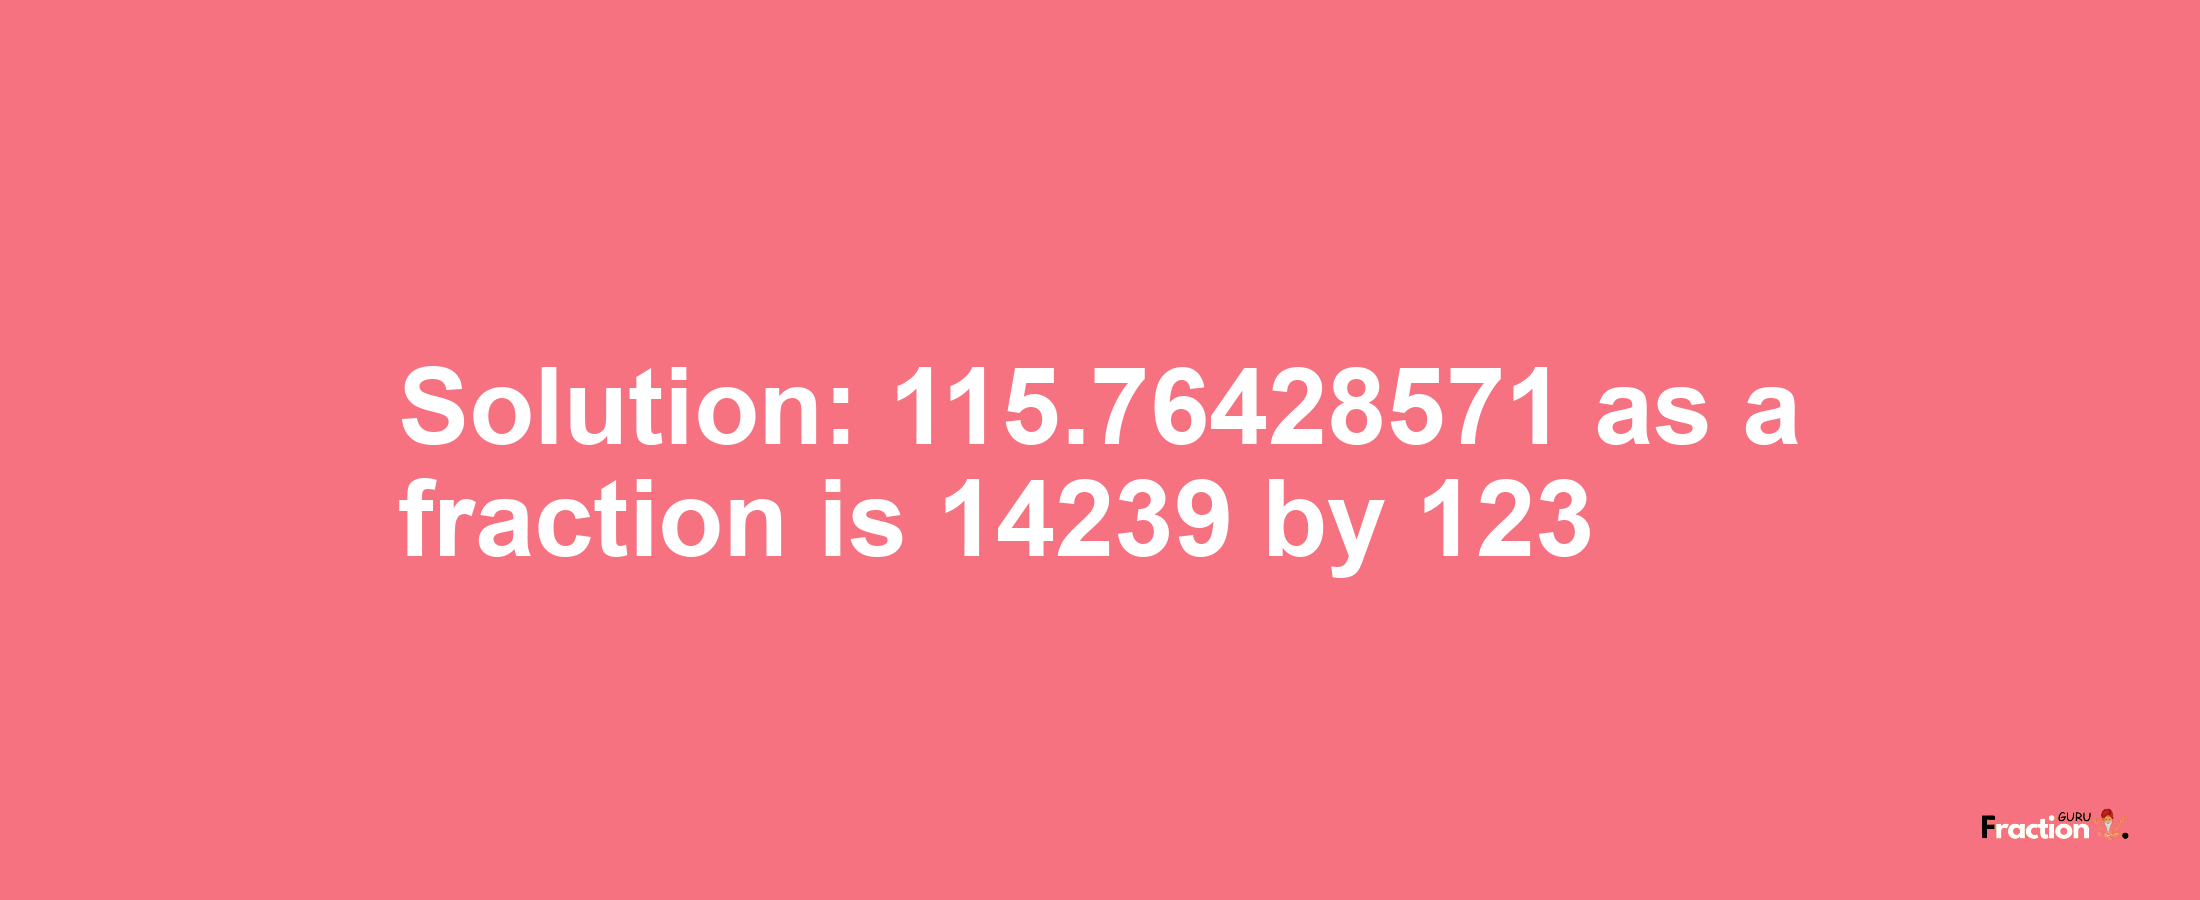 Solution:115.76428571 as a fraction is 14239/123